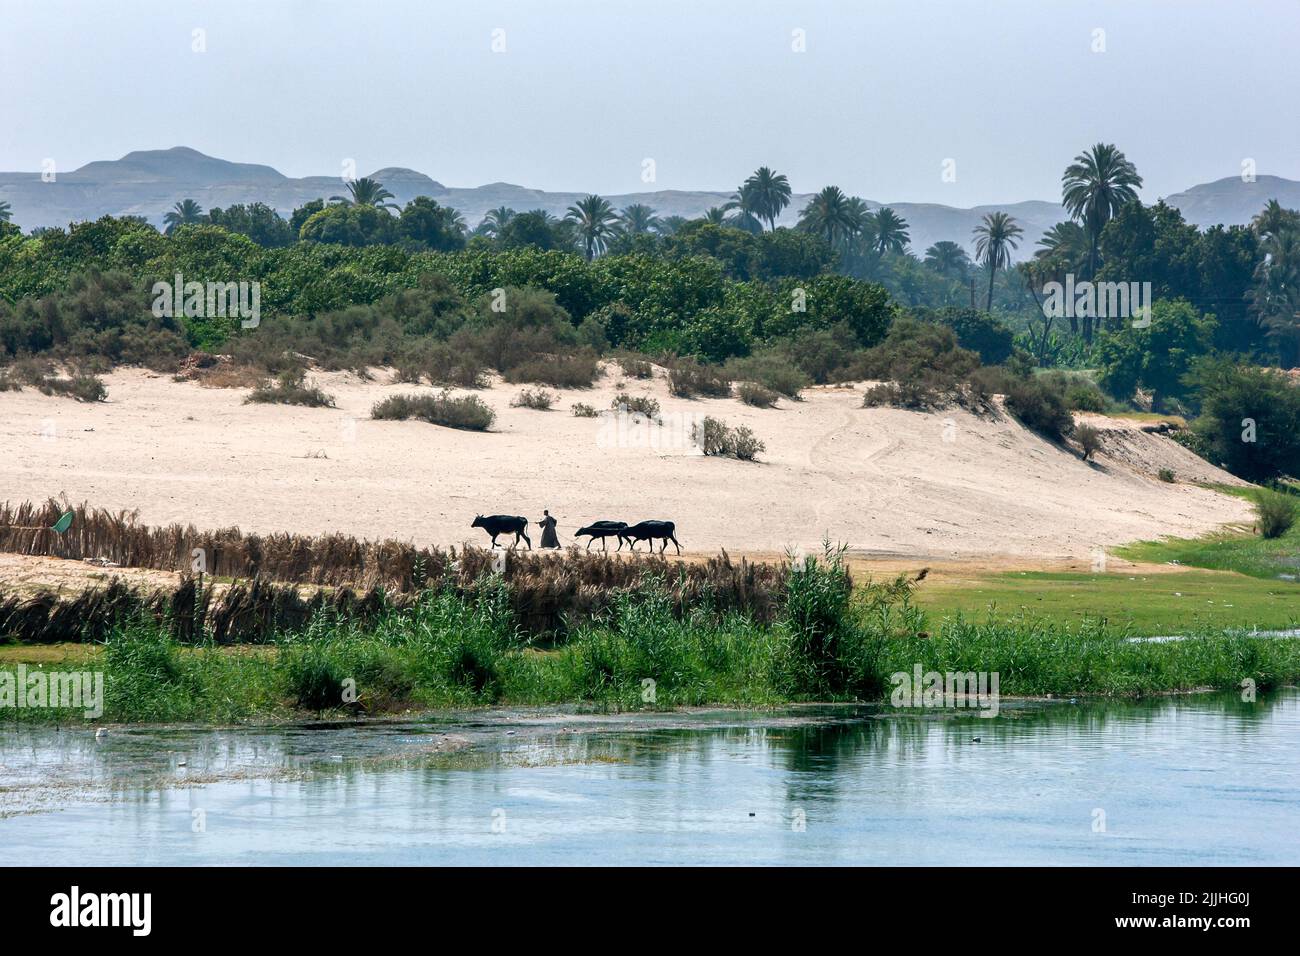 A man leads cattle along the bank of the River Nile at Edfu in Egypt on a hot day. Stock Photo